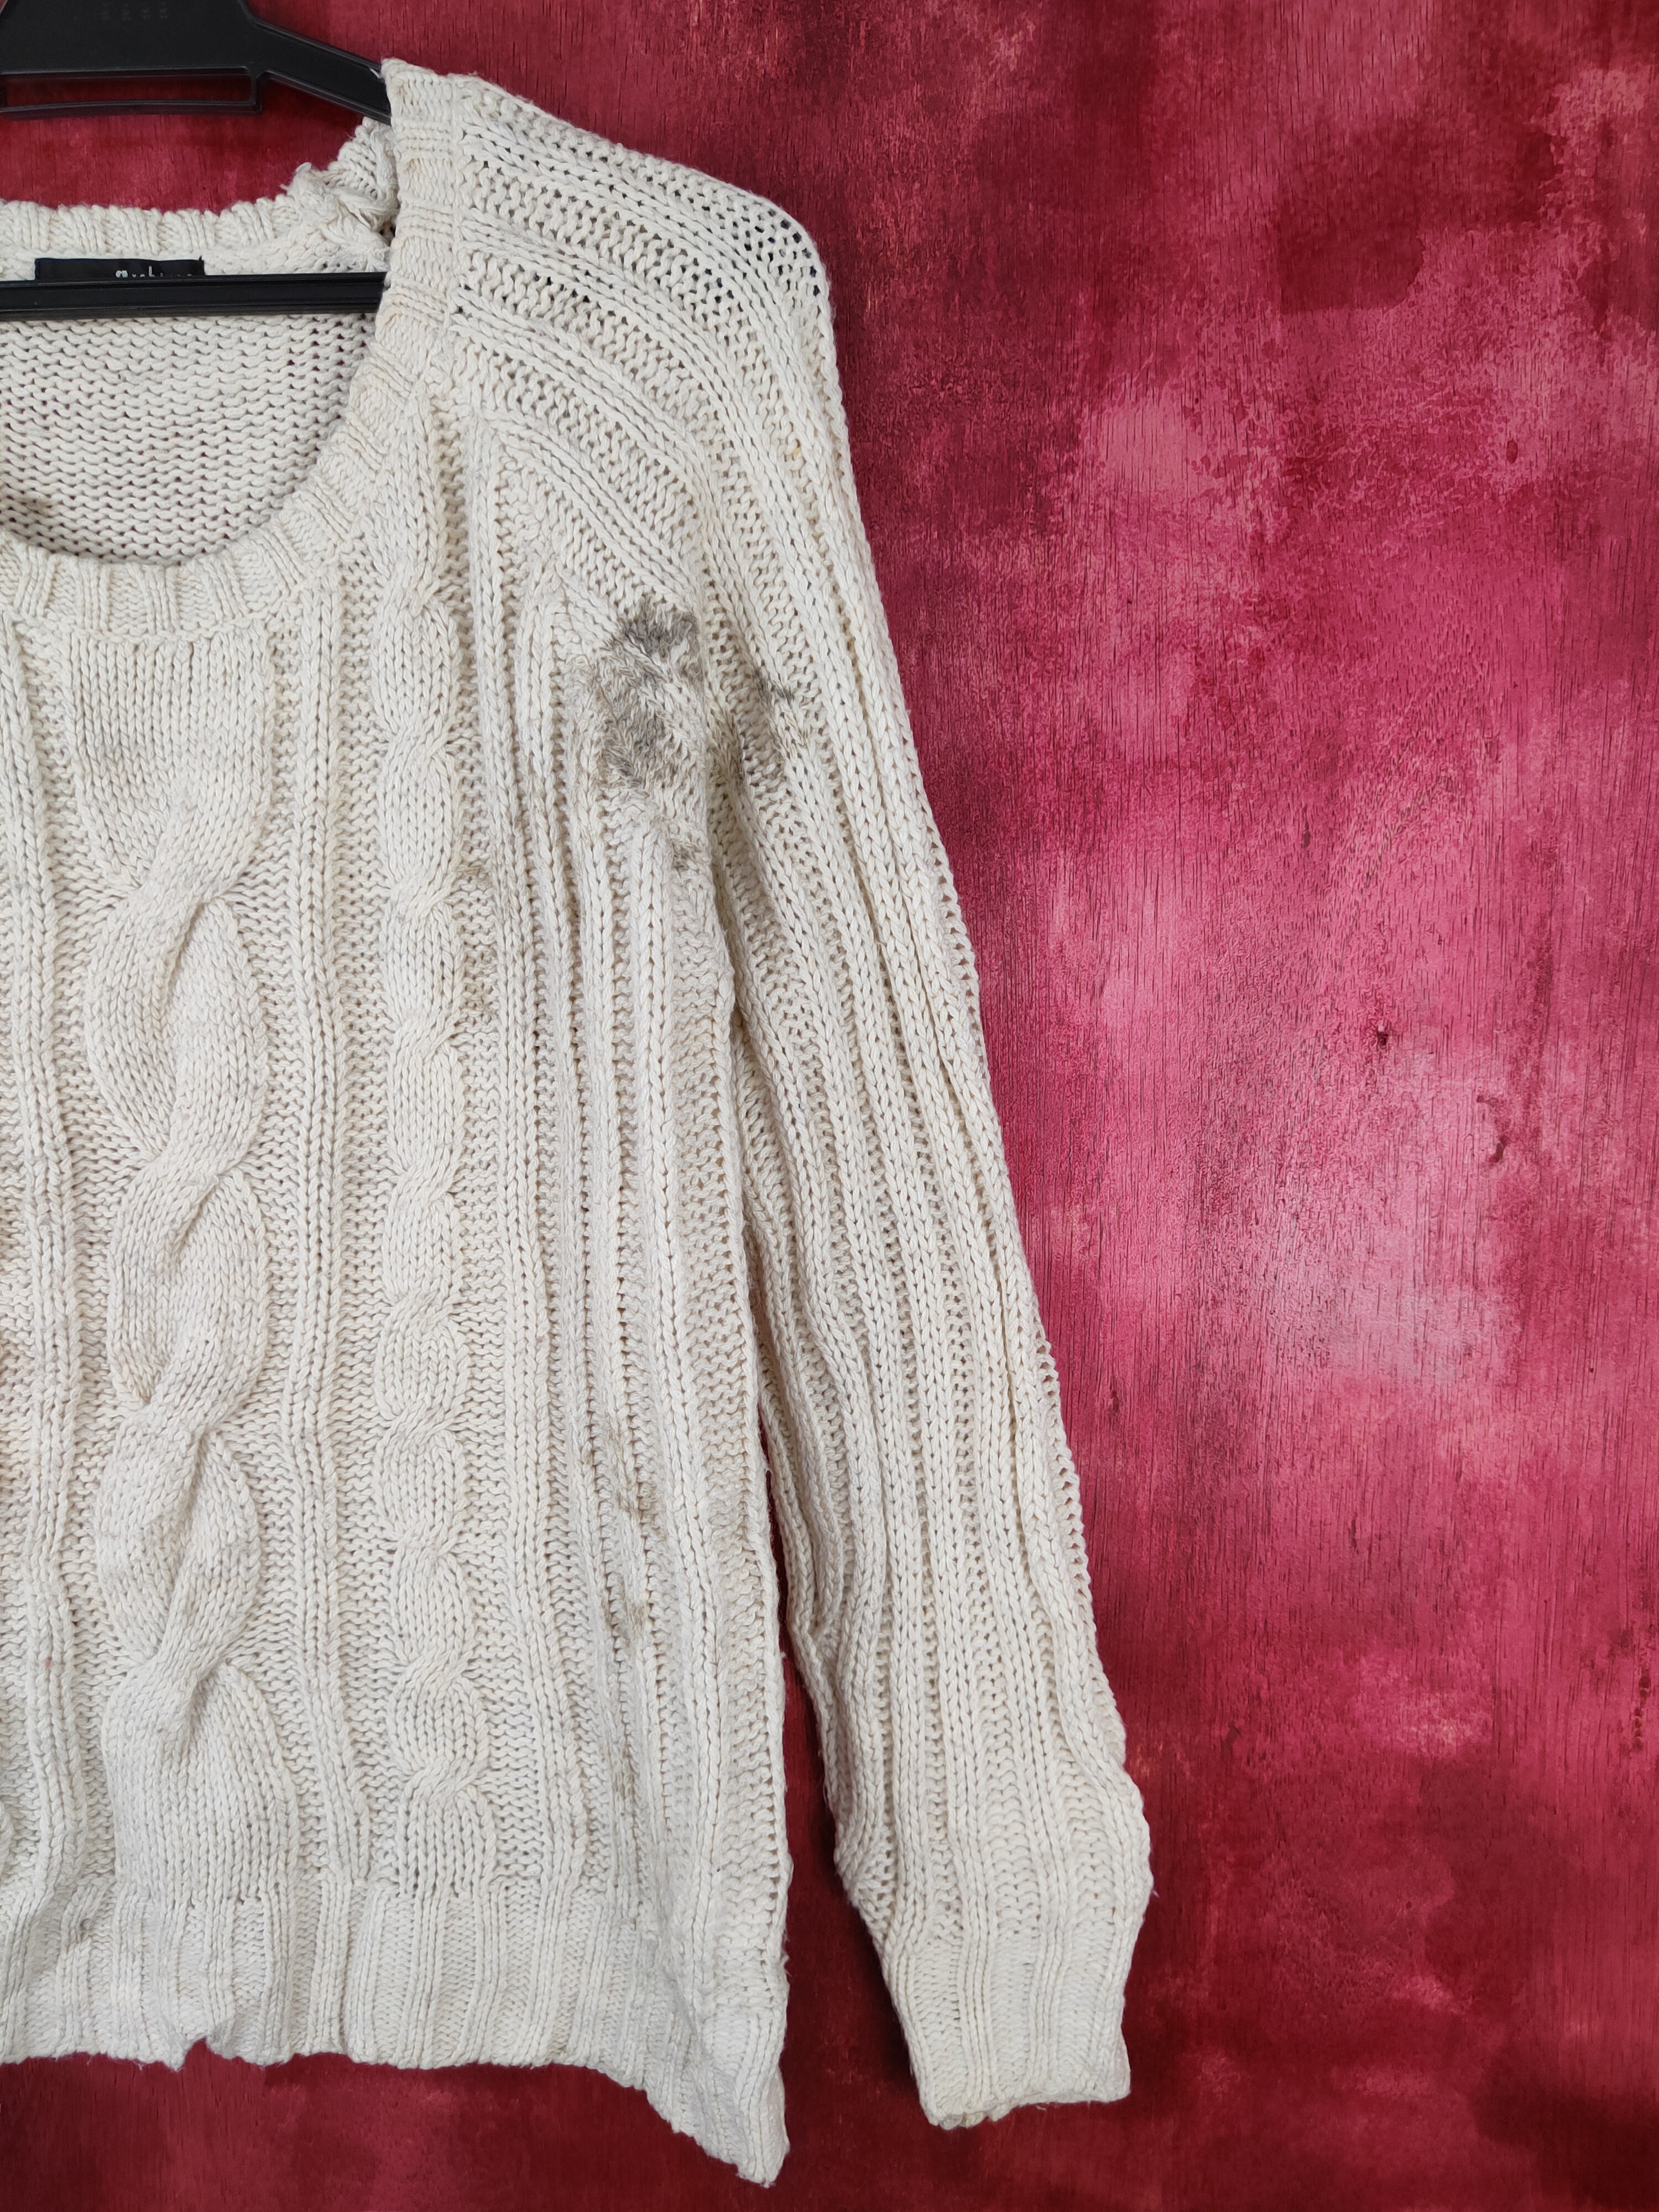 Japanese Brand - Archives White Knitwear Sweater Damage With Stain - 5